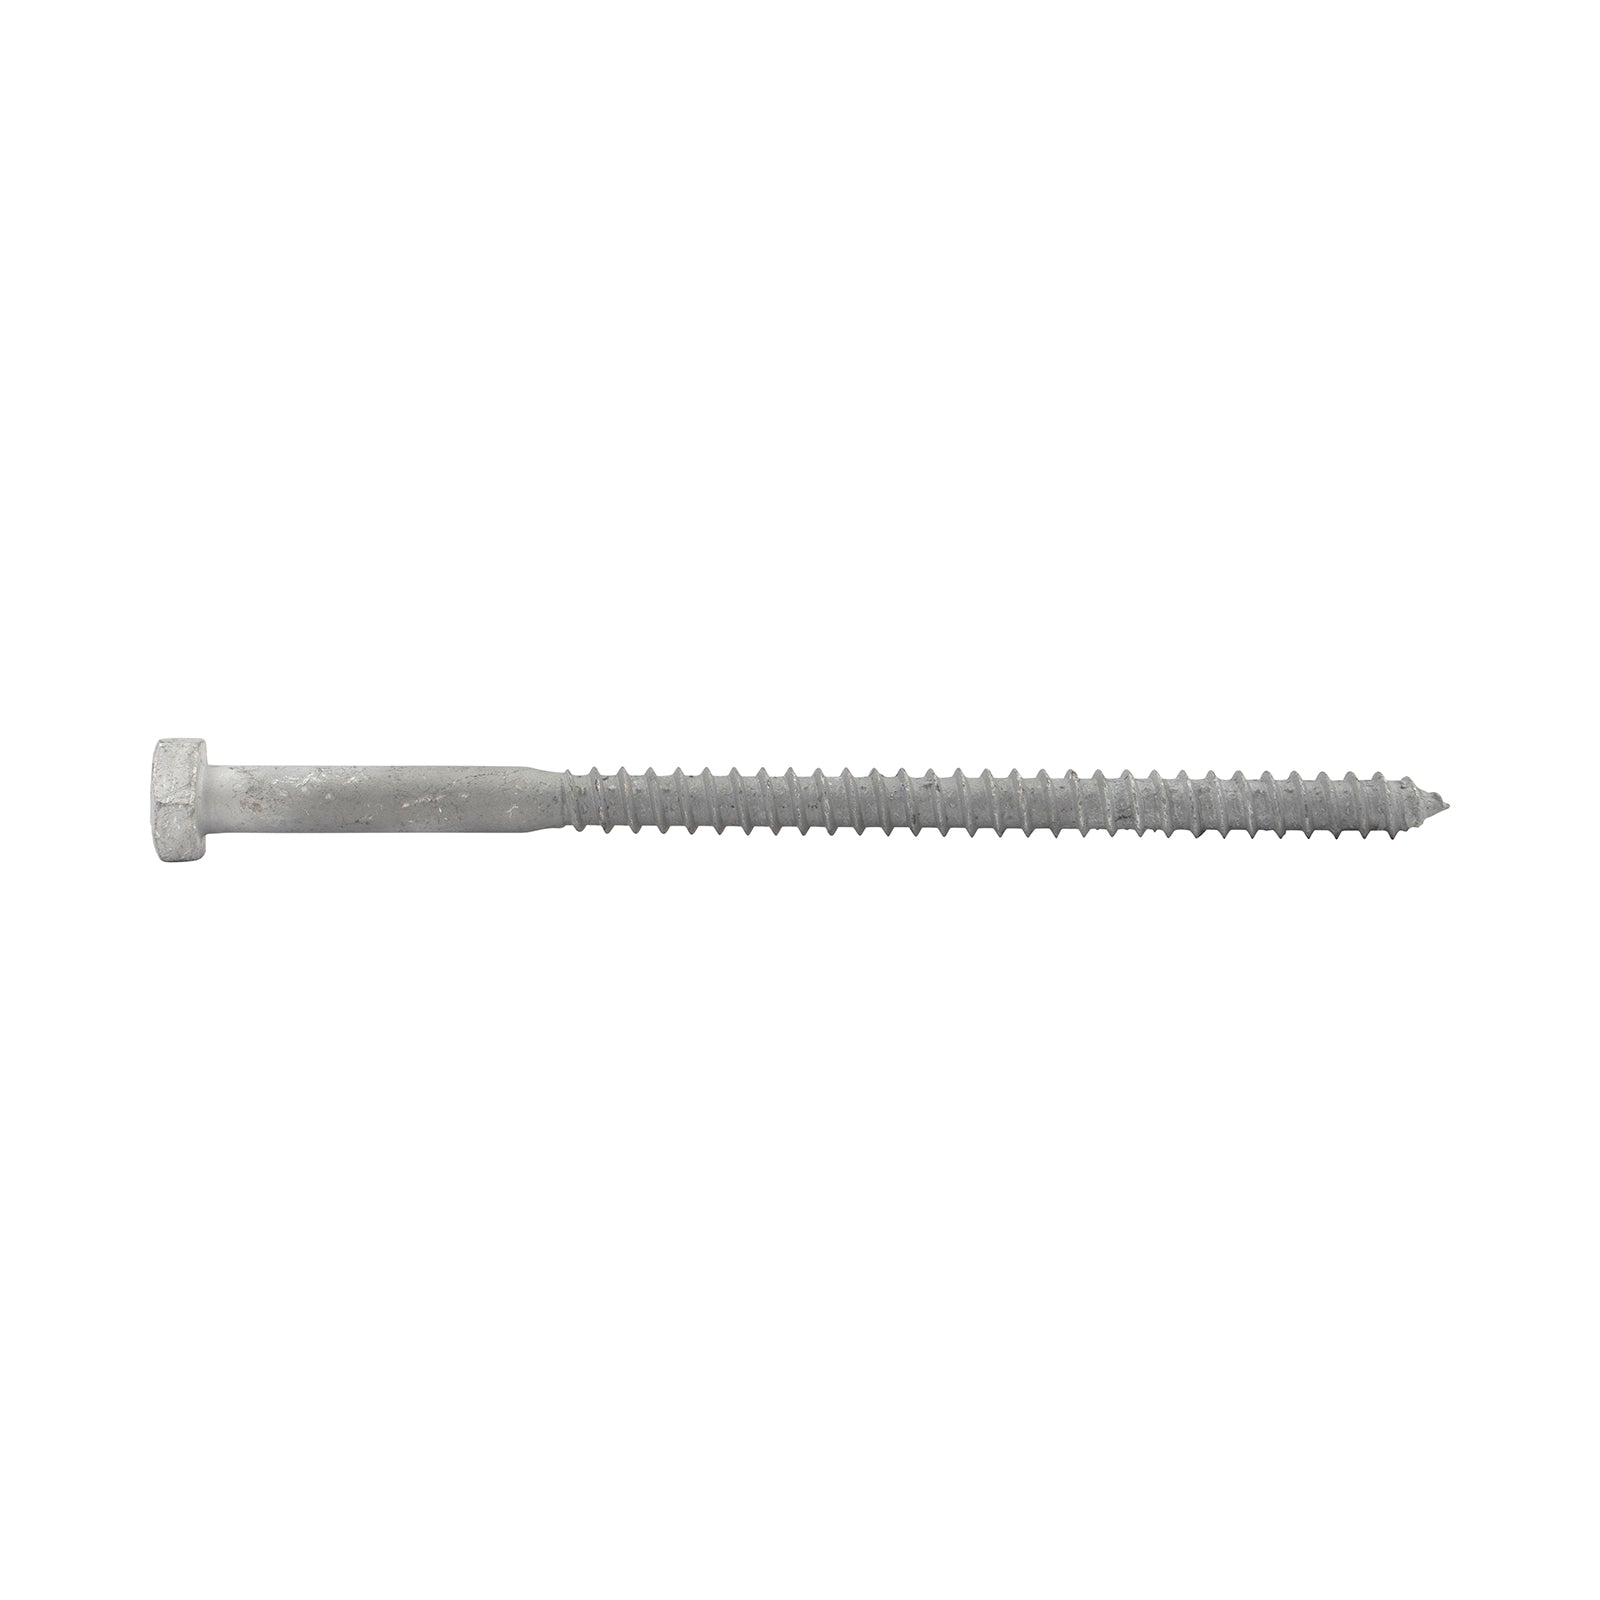 1/4"-10 x 4-1/2" Conquest Hex Head Lag Bolt for Wood - Hot Dip Galvanized